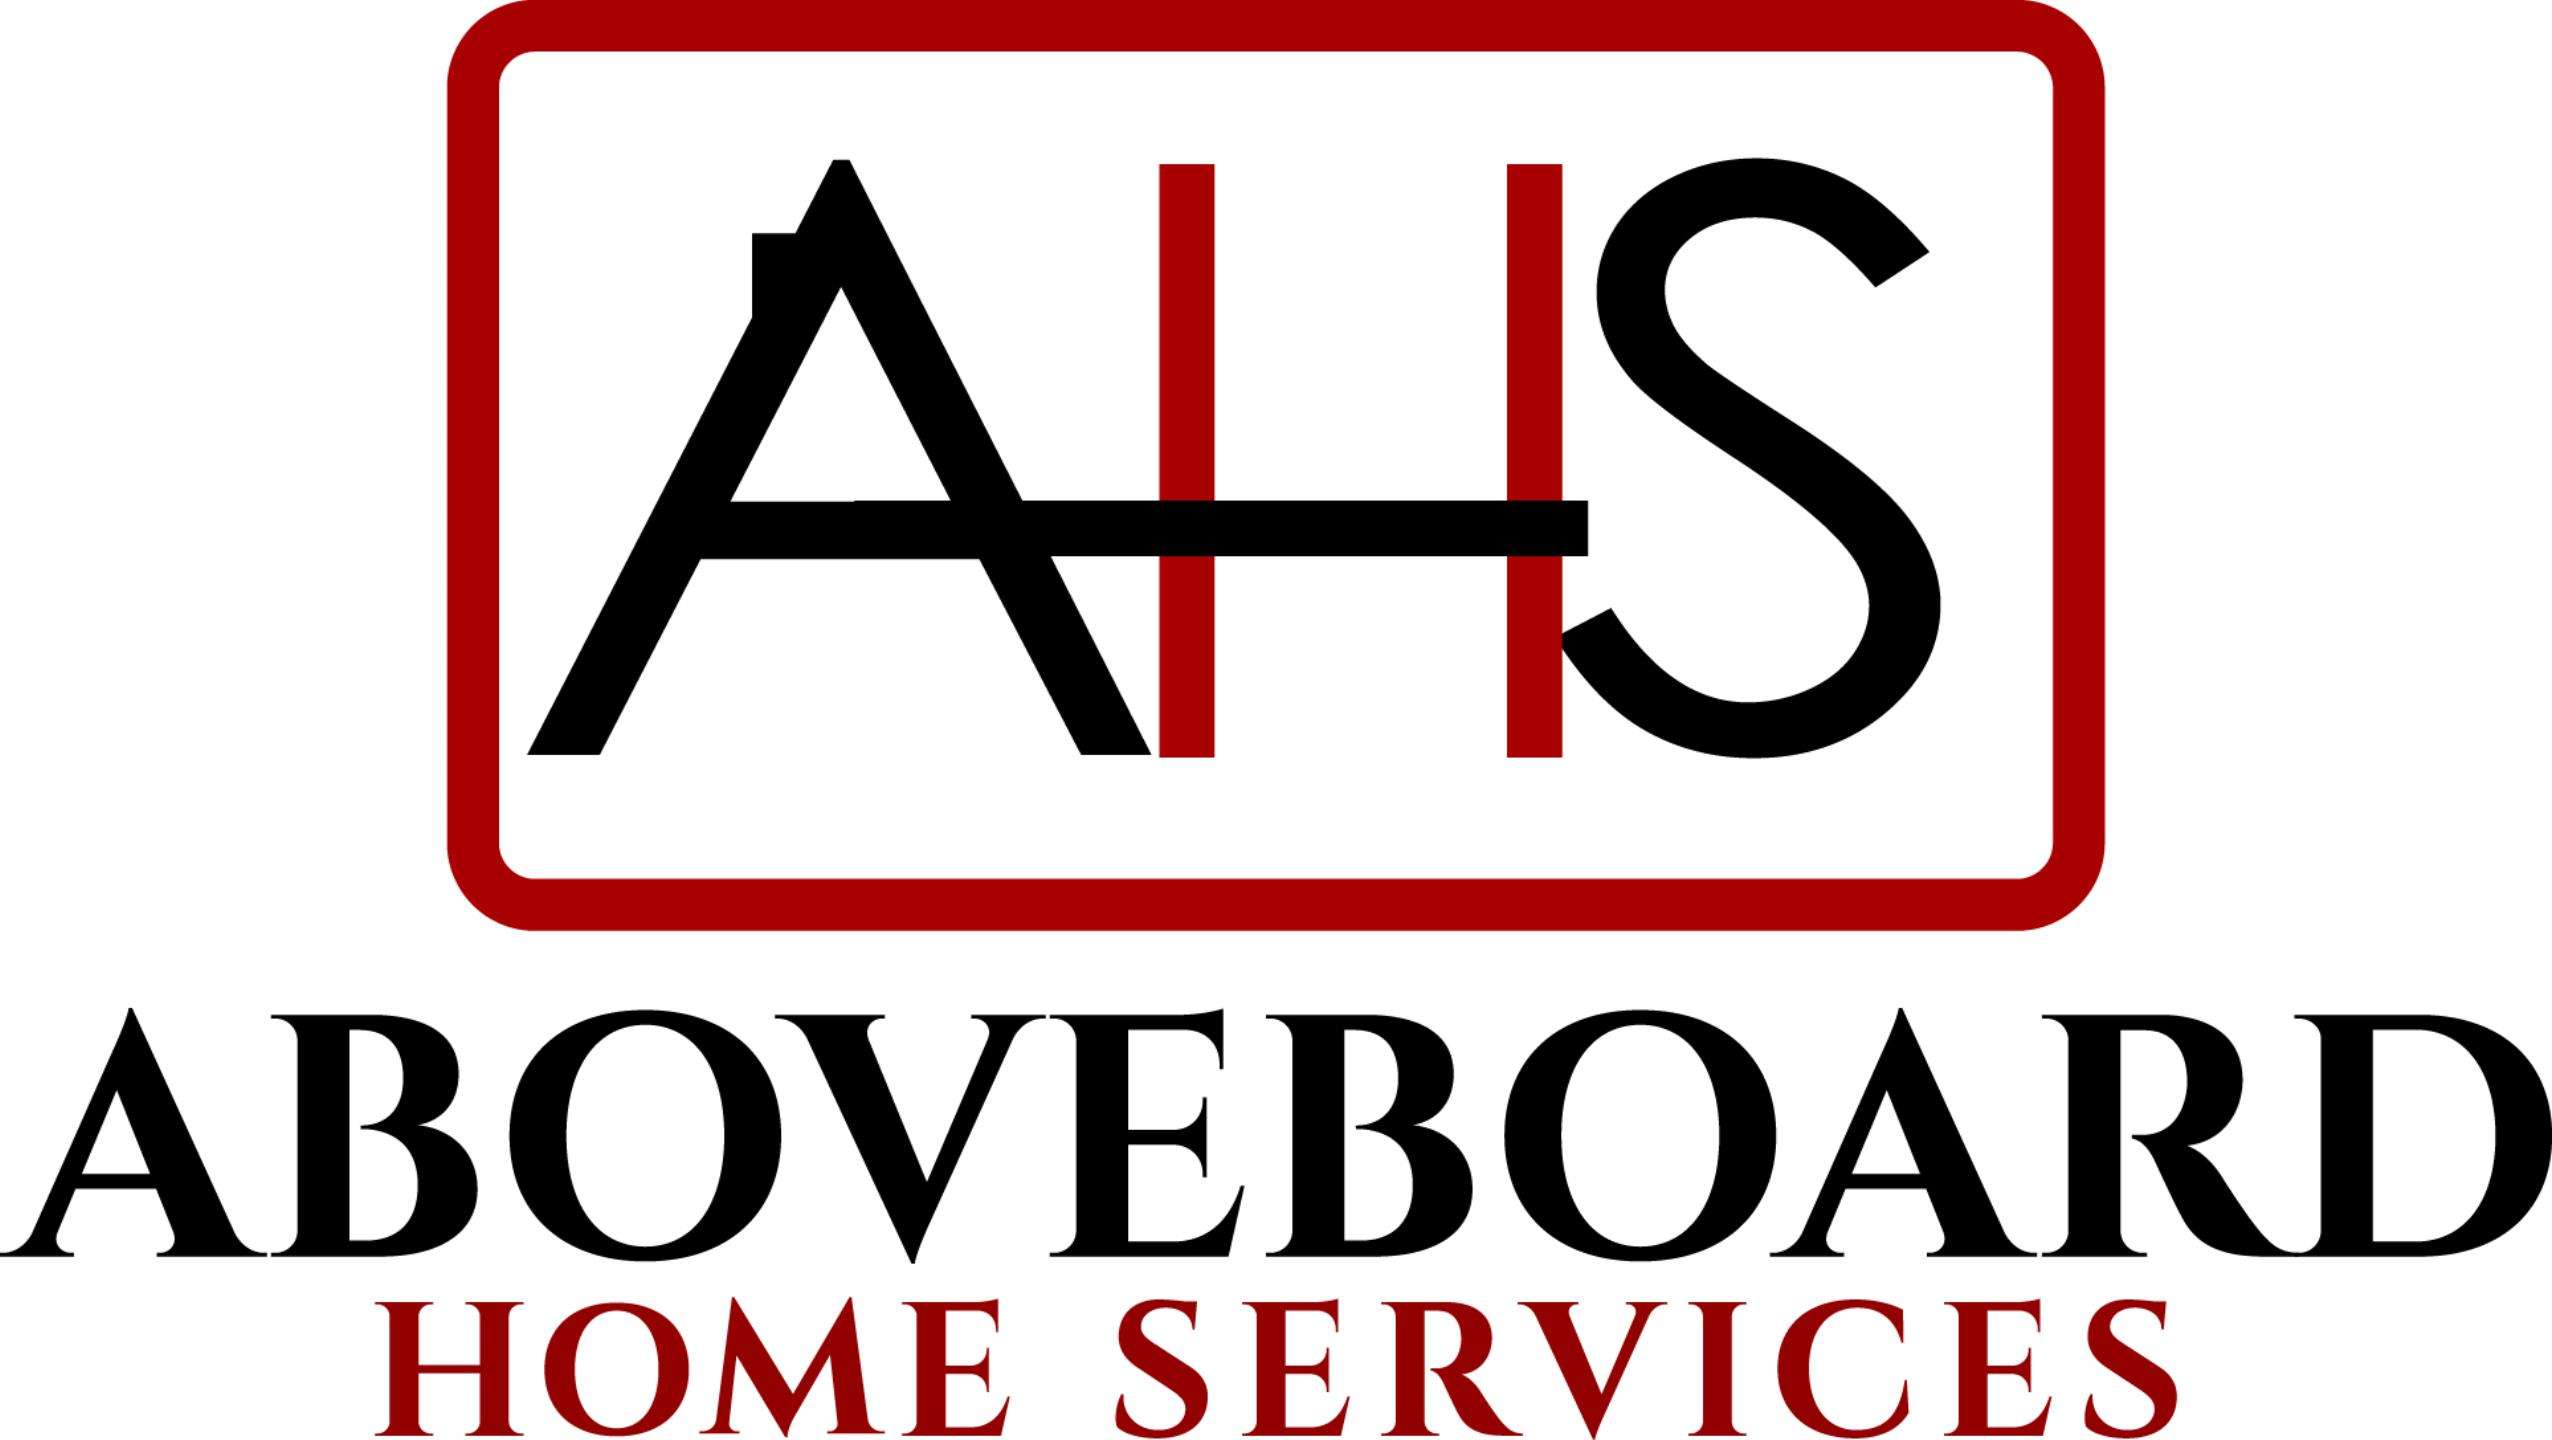 Aboveboard Home Services Logo